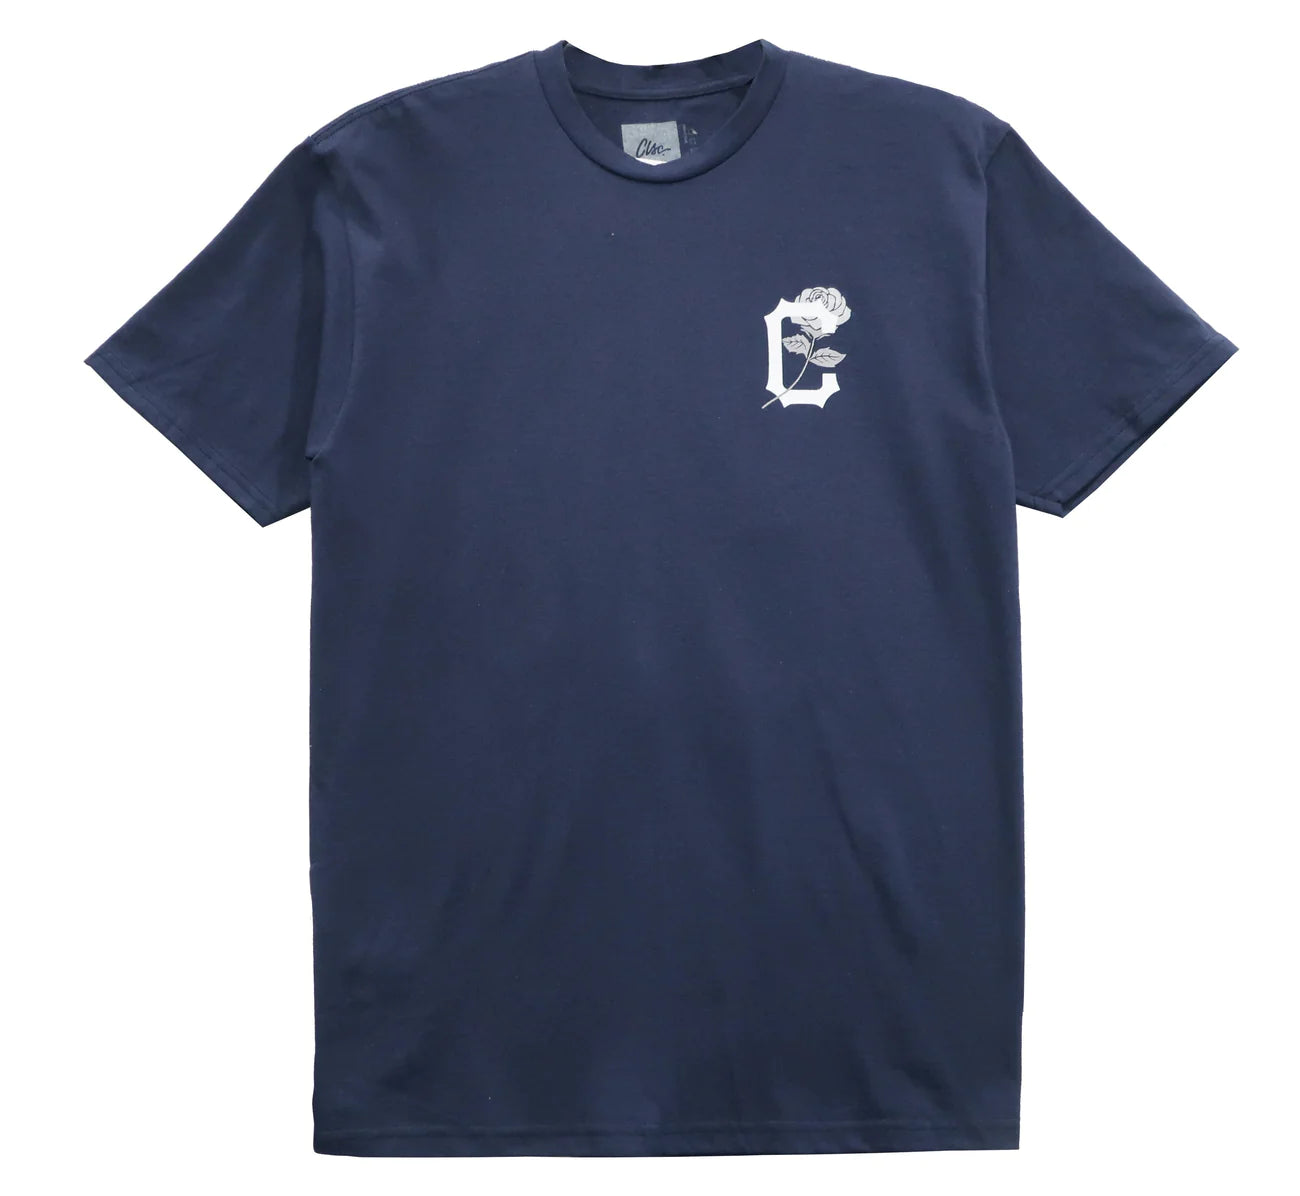 Clsc Graphic Tee Navy (S-XL)